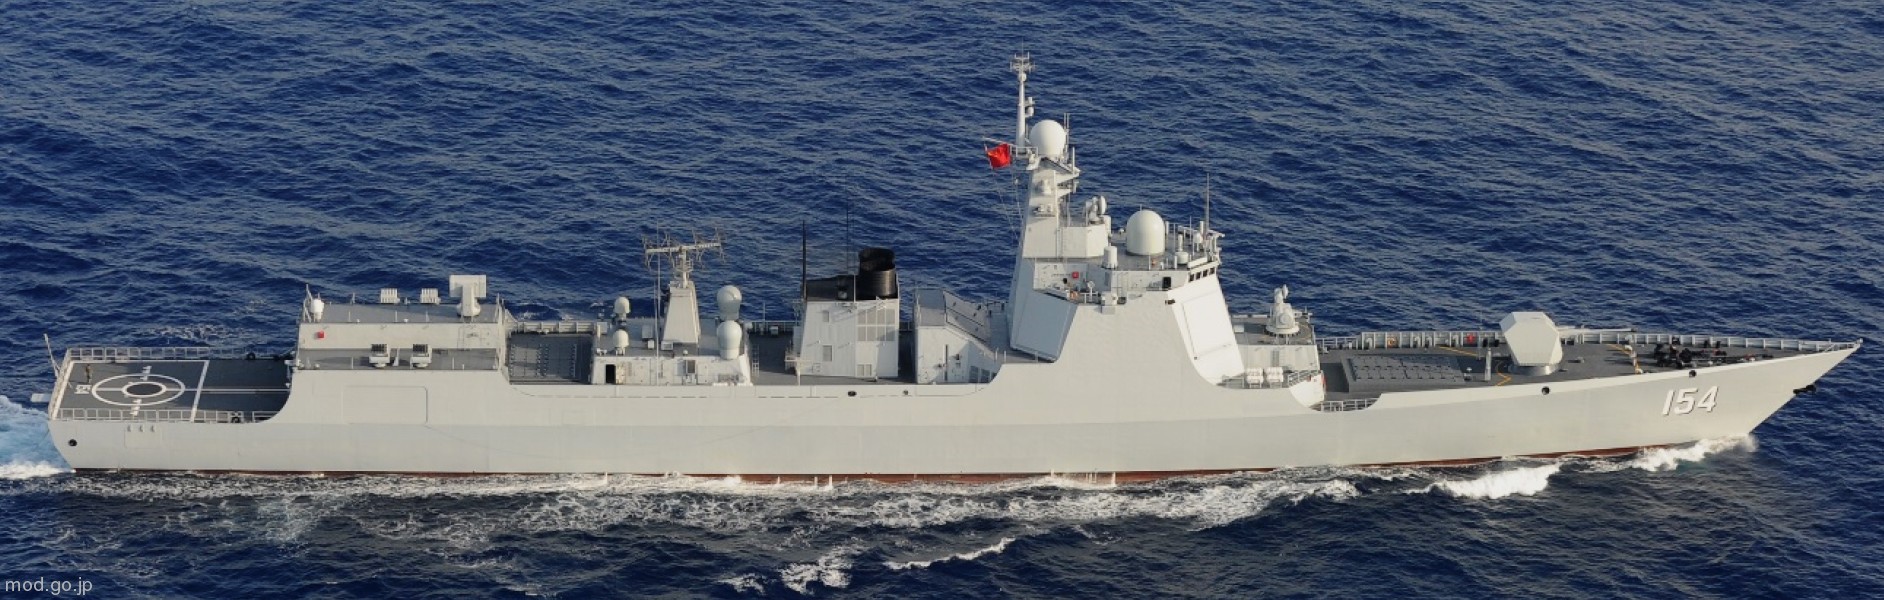 type 052d luyang class guided missile destroyer ddg china people's liberation army navy plan 154x